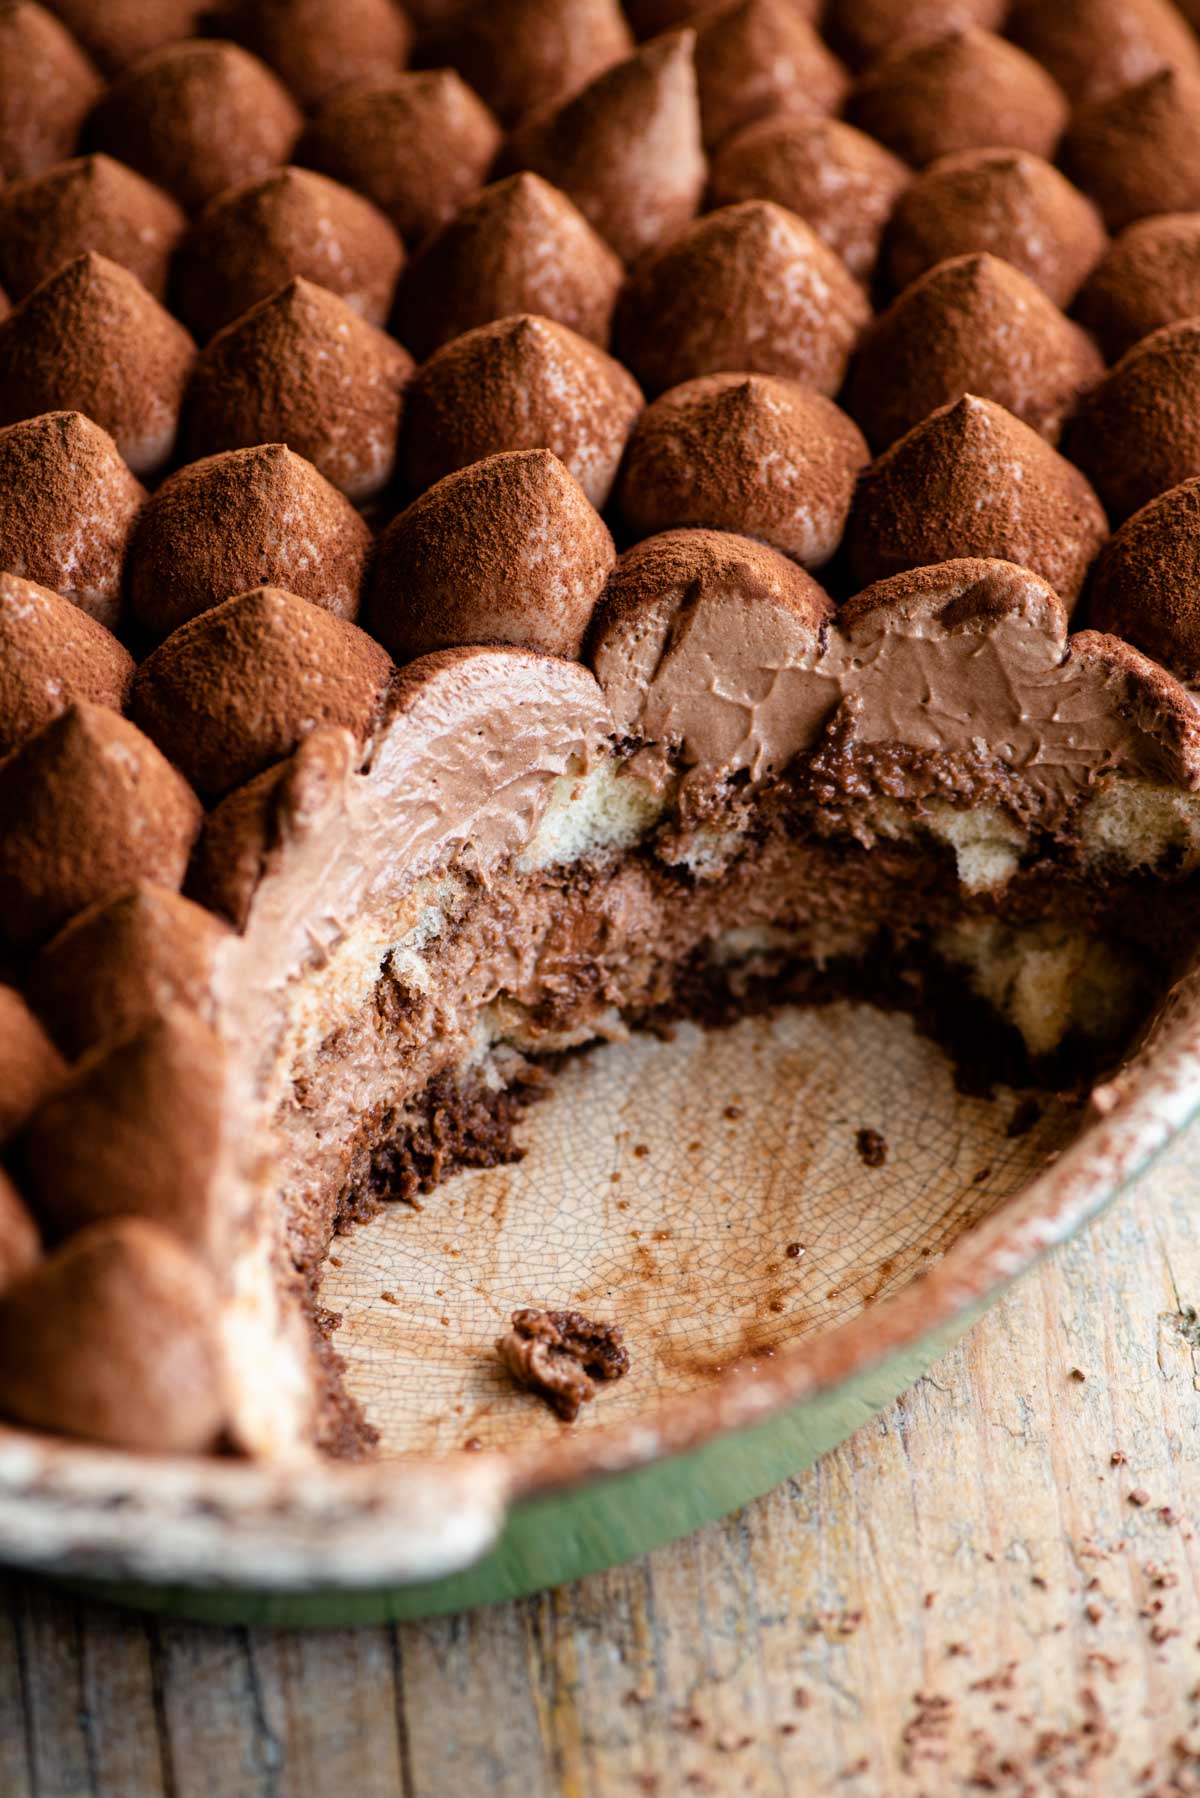 A close up of a chocolate tiramisu in an oval dish with a scoop out revealing layers of chocolate cream and sponge fingers.